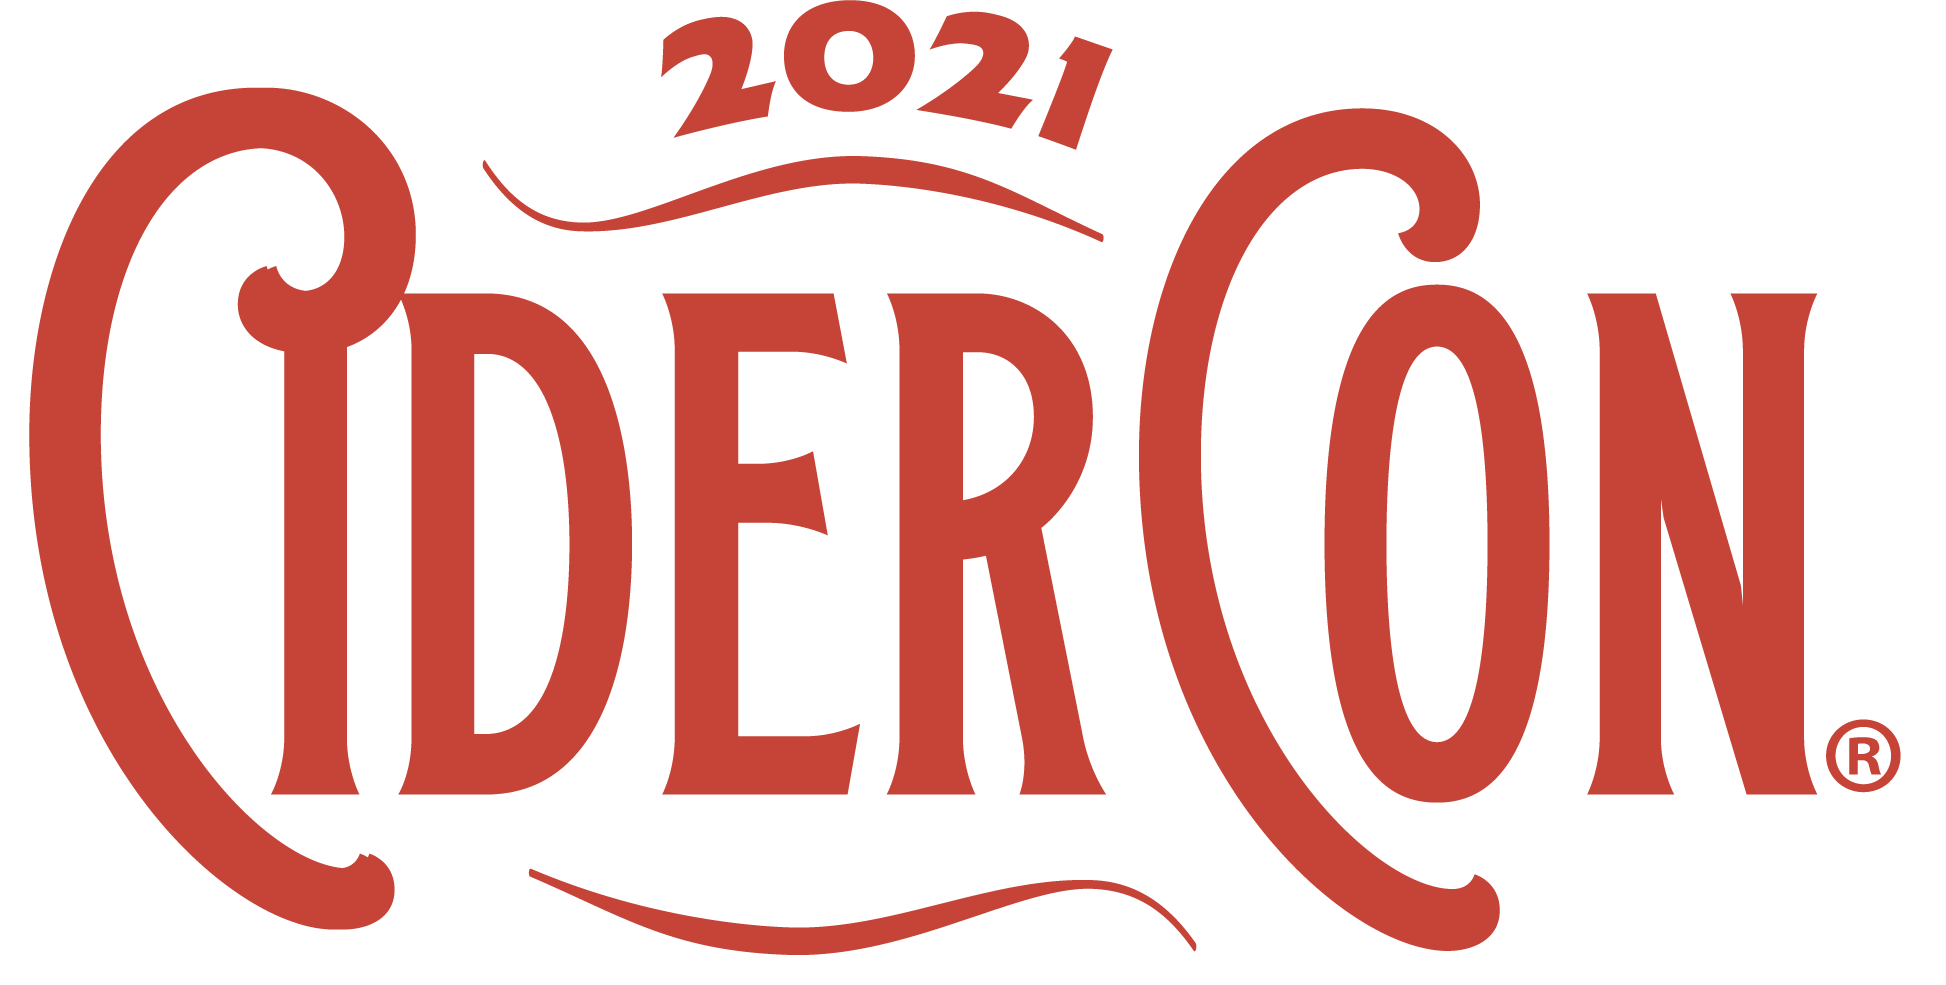 Dr. J Takes the Mainstage at CiderCon 2021